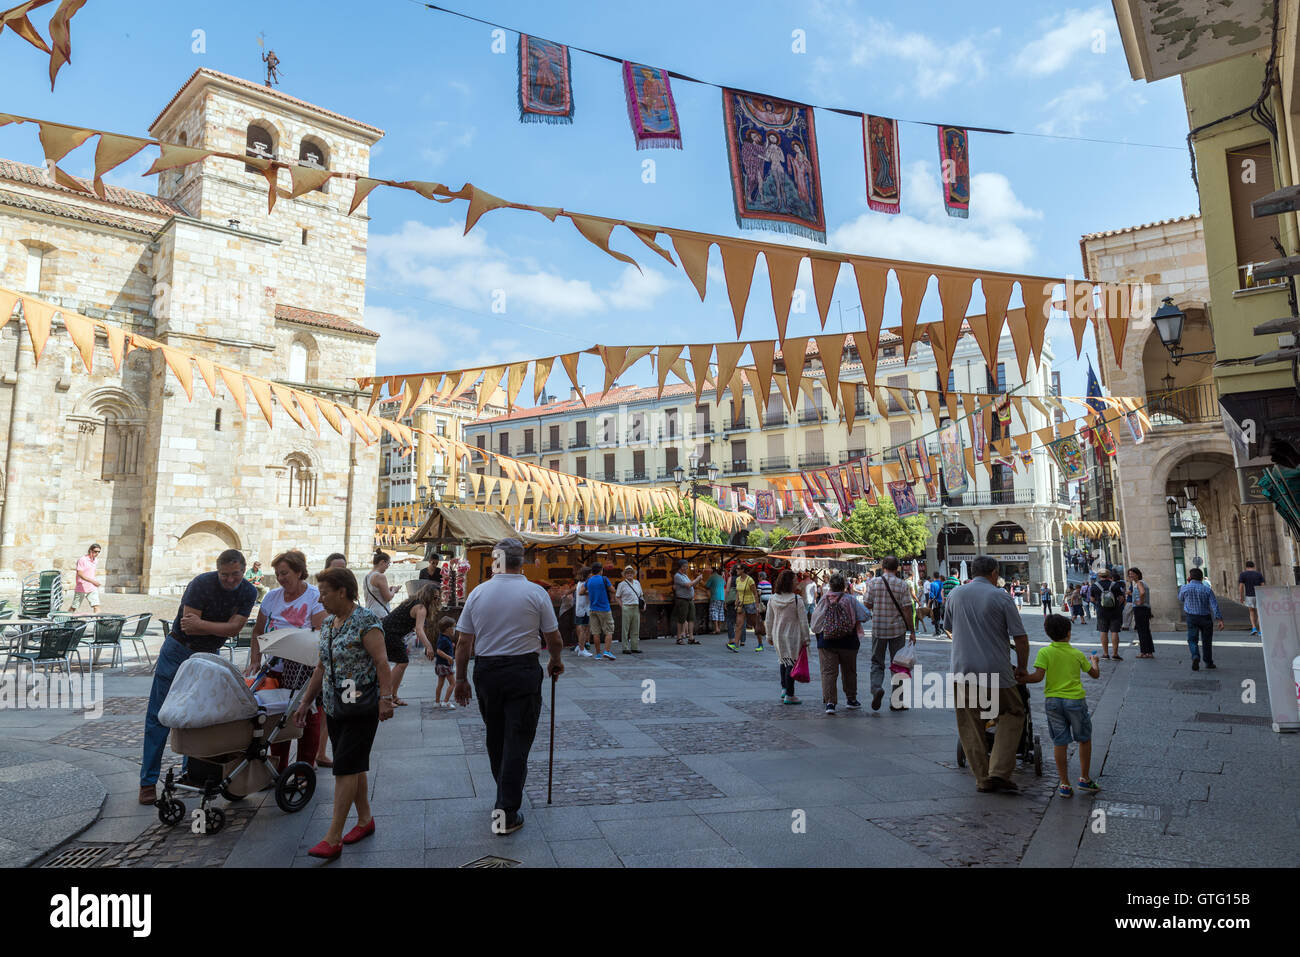 ZAMORA, SPAIN - SEPTEMBER 9, 2016: People in the main square of Zamora during the recreation of a medieval market Stock Photo